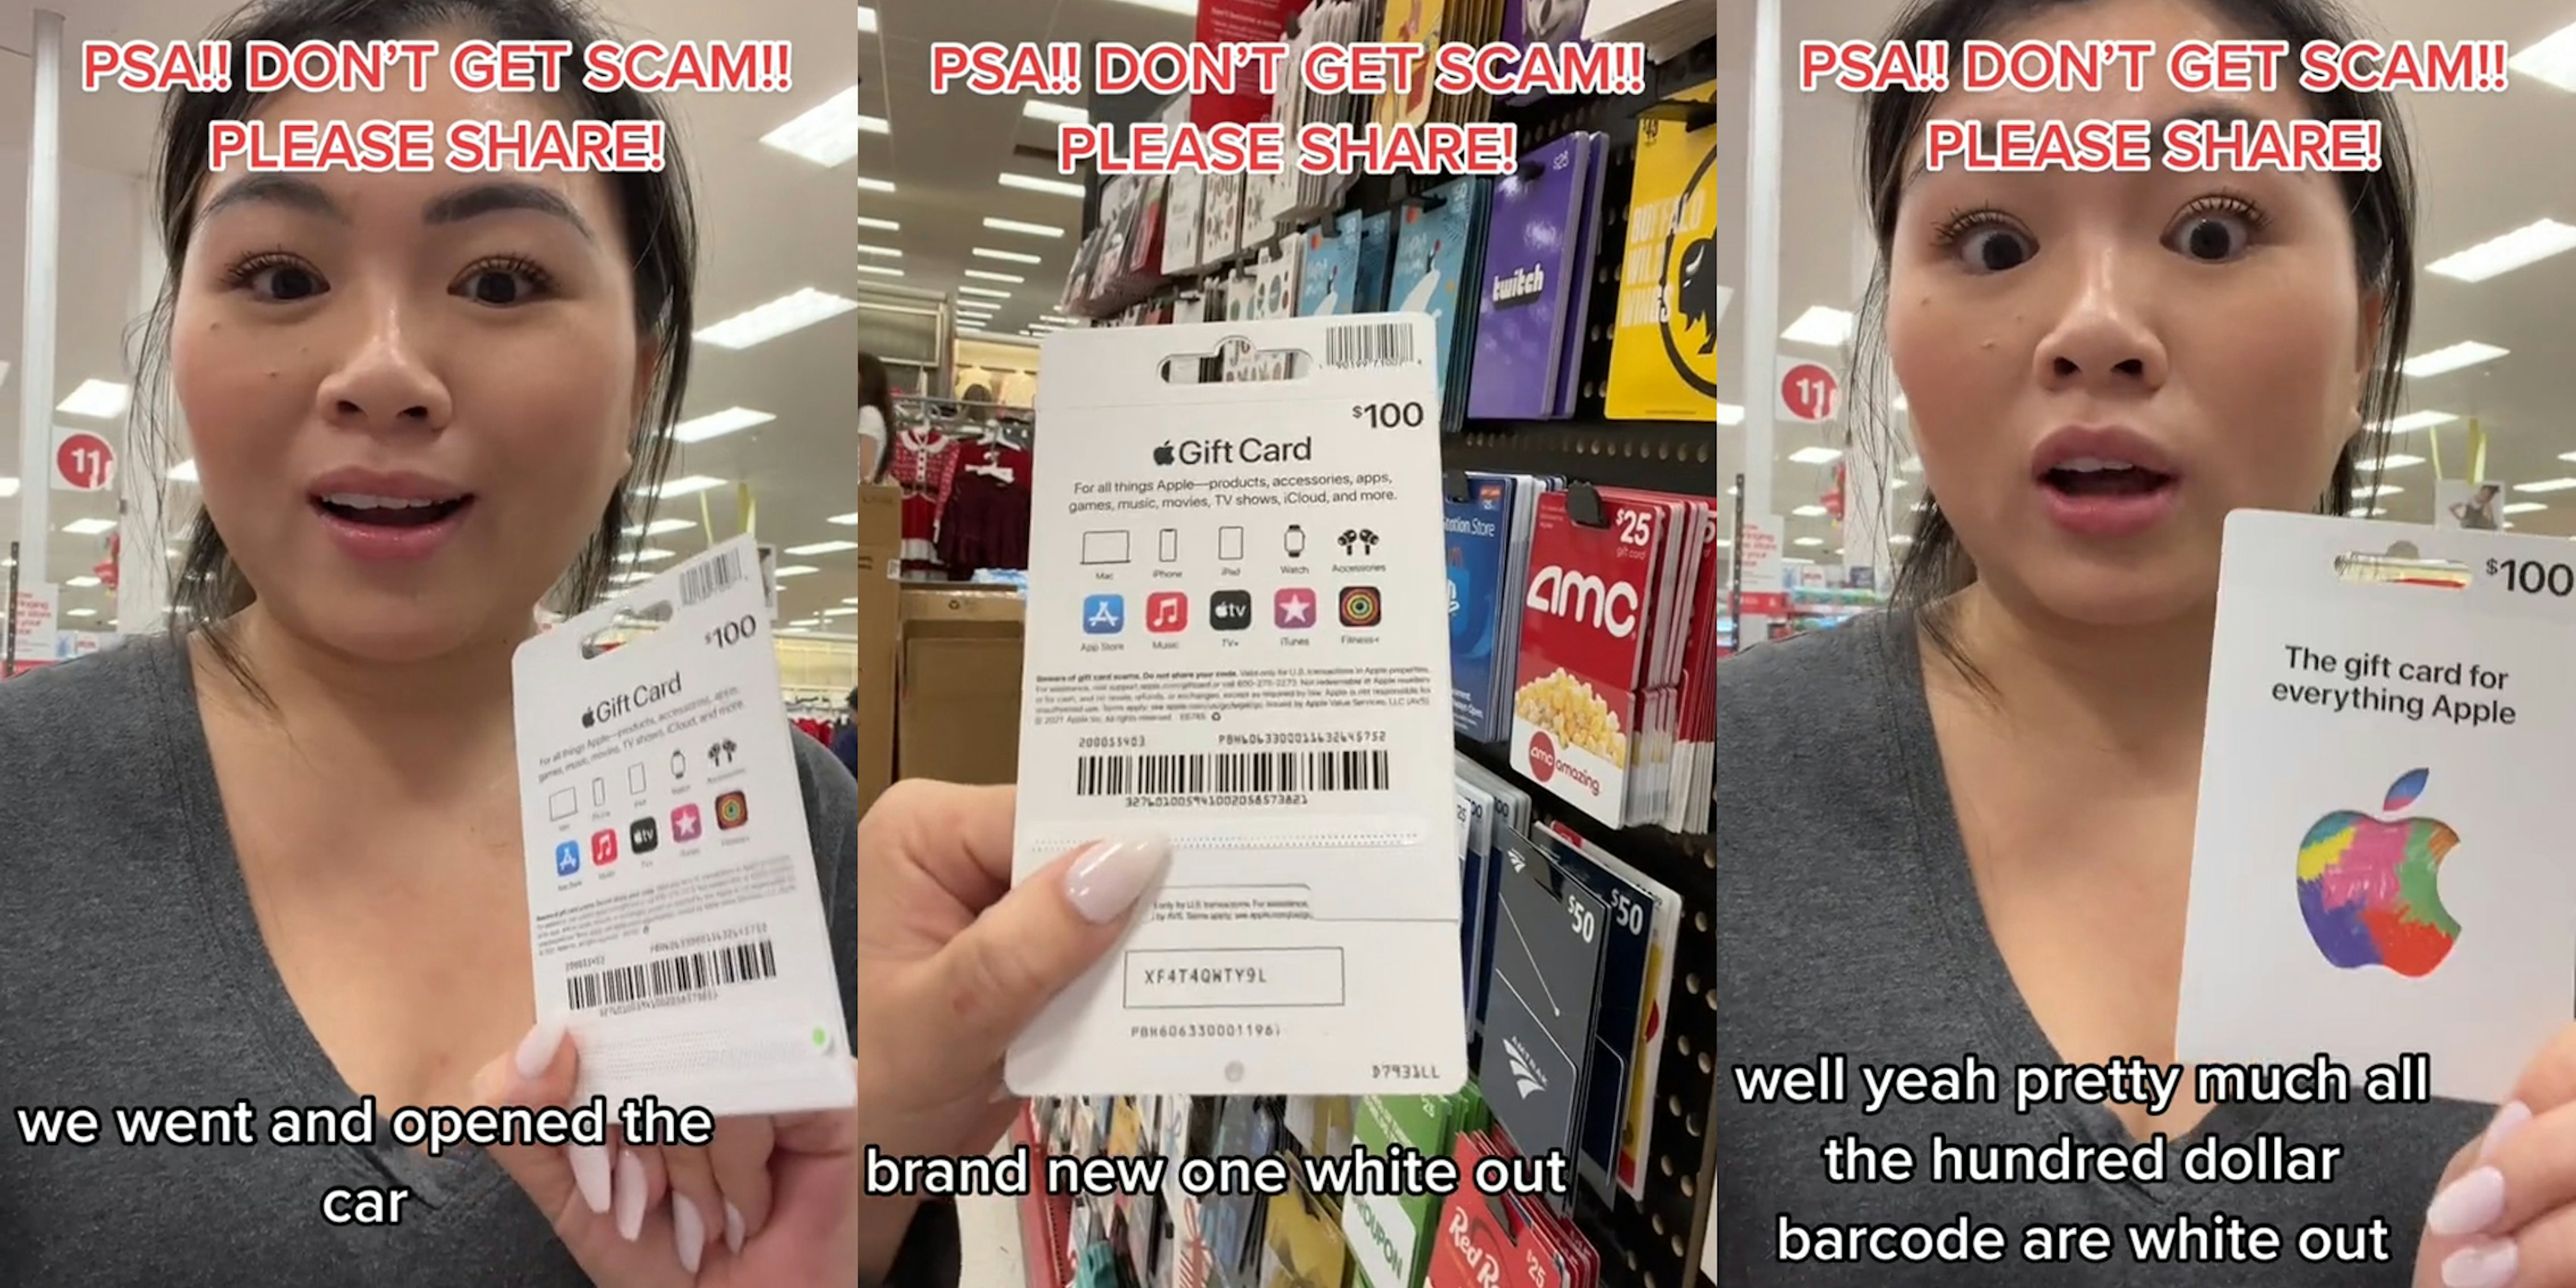 woman at Target holding Apple gift card caption 'PSA!! DON'T GET SCAM!! PLEASE SHARE!' 'we went and opened the car' (l) woman at Target holding Apple gift card caption 'PSA!! DON'T GET SCAM!! PLEASE SHARE!' 'brand new one white out' (c) woman at Target holding Apple gift card caption 'PSA!! DON'T GET SCAM!! PLEASE SHARE!' 'well yeah pretty much all the hundred dollar barcode are white out' (r)